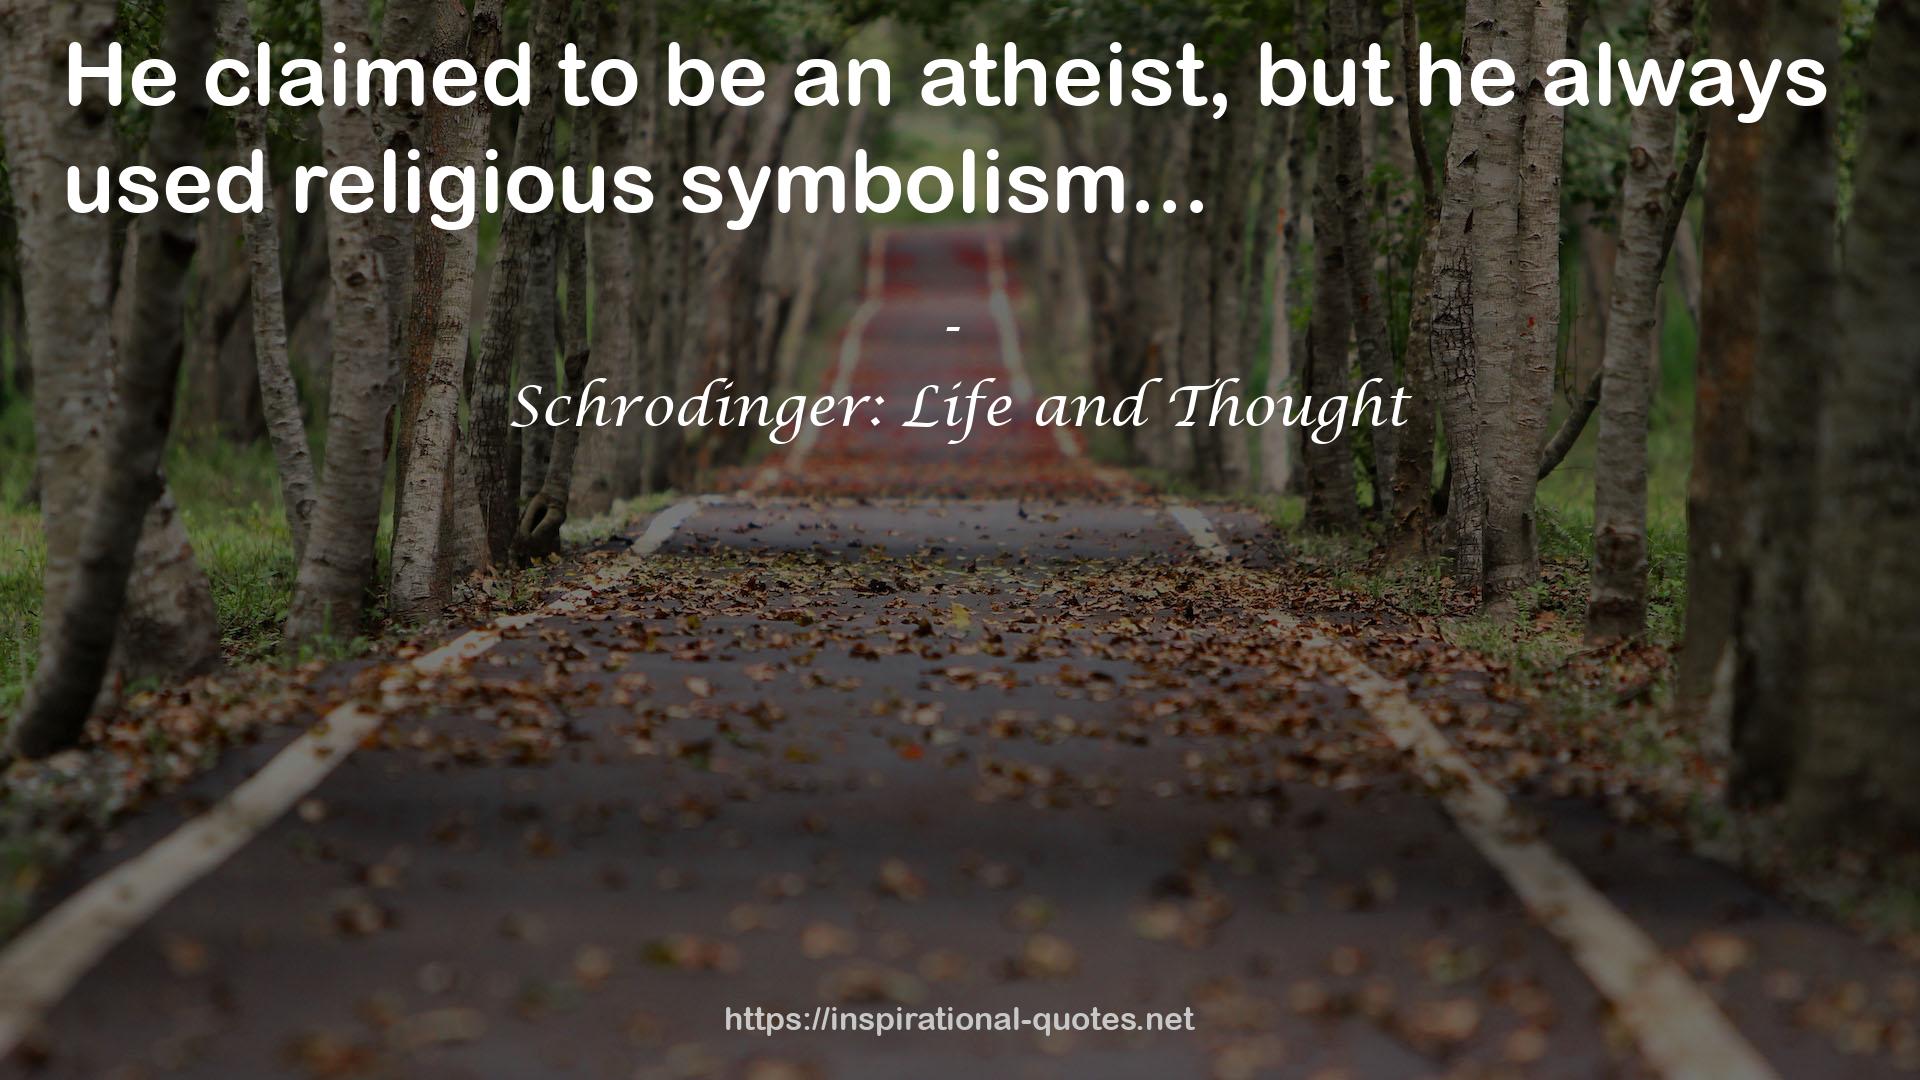 Schrodinger: Life and Thought QUOTES